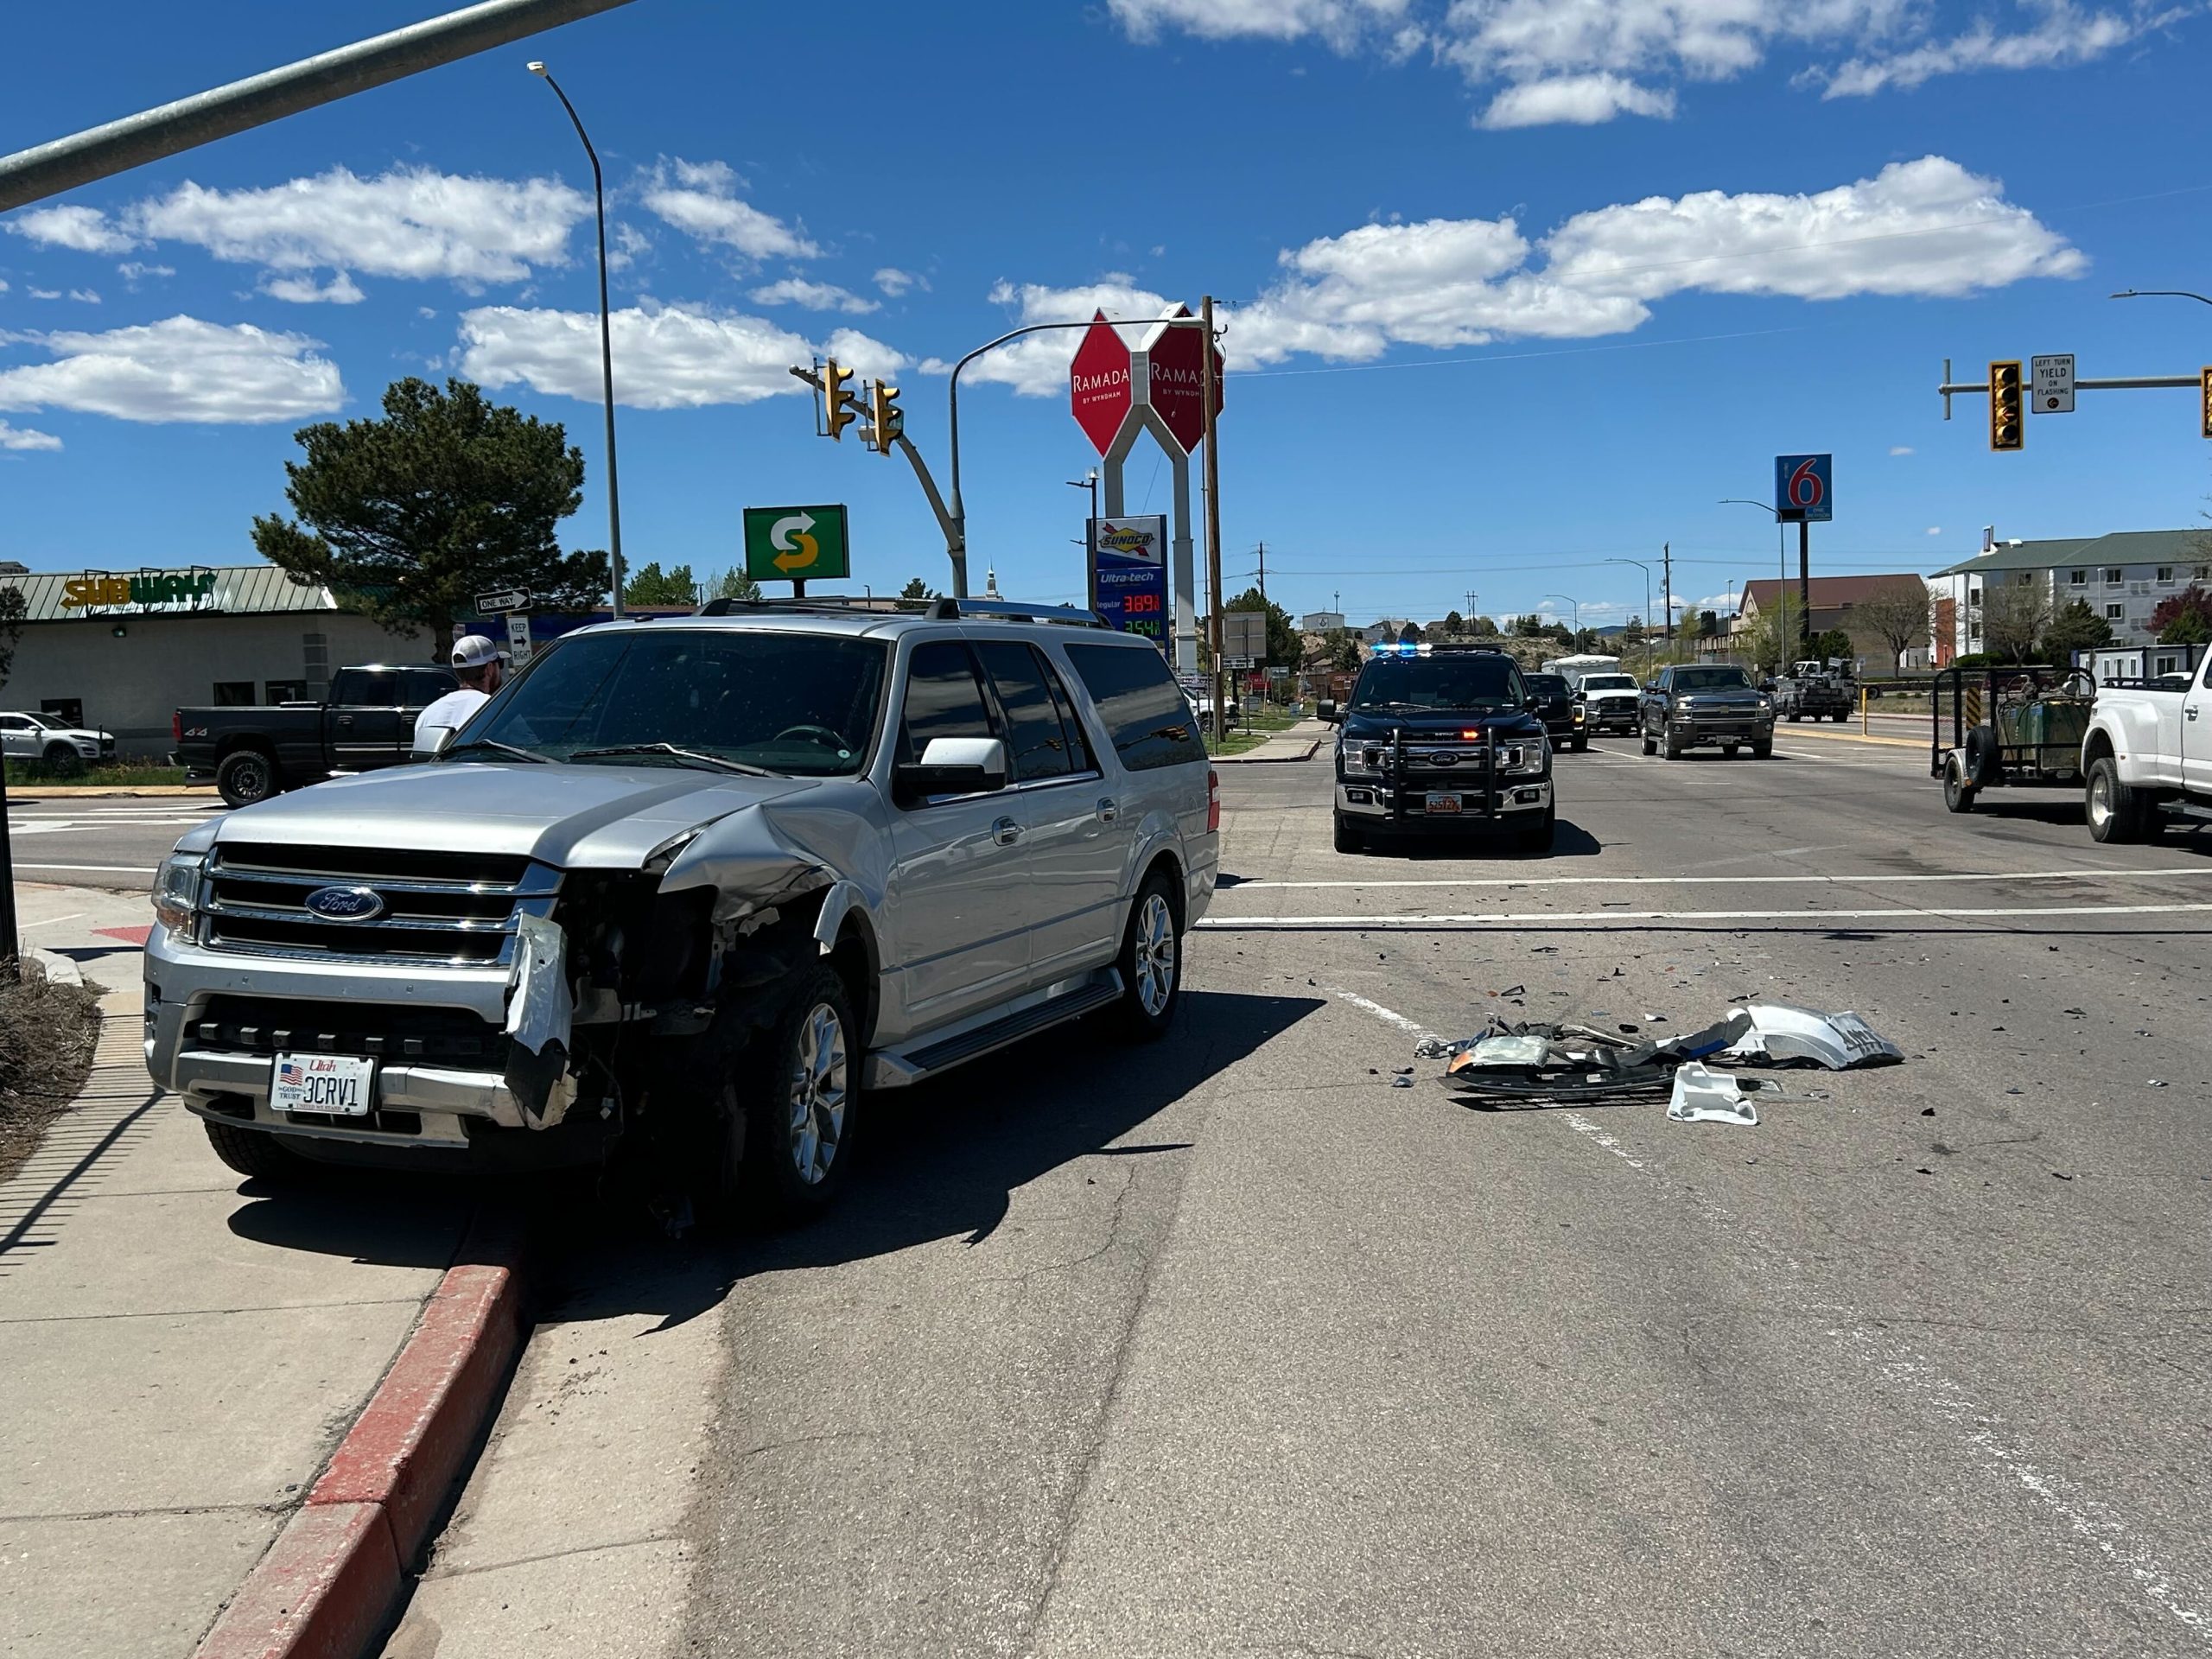 cedar-city-police-say-failure-to-yield-on-yellow-light-led-to-collision-between-2-suvs